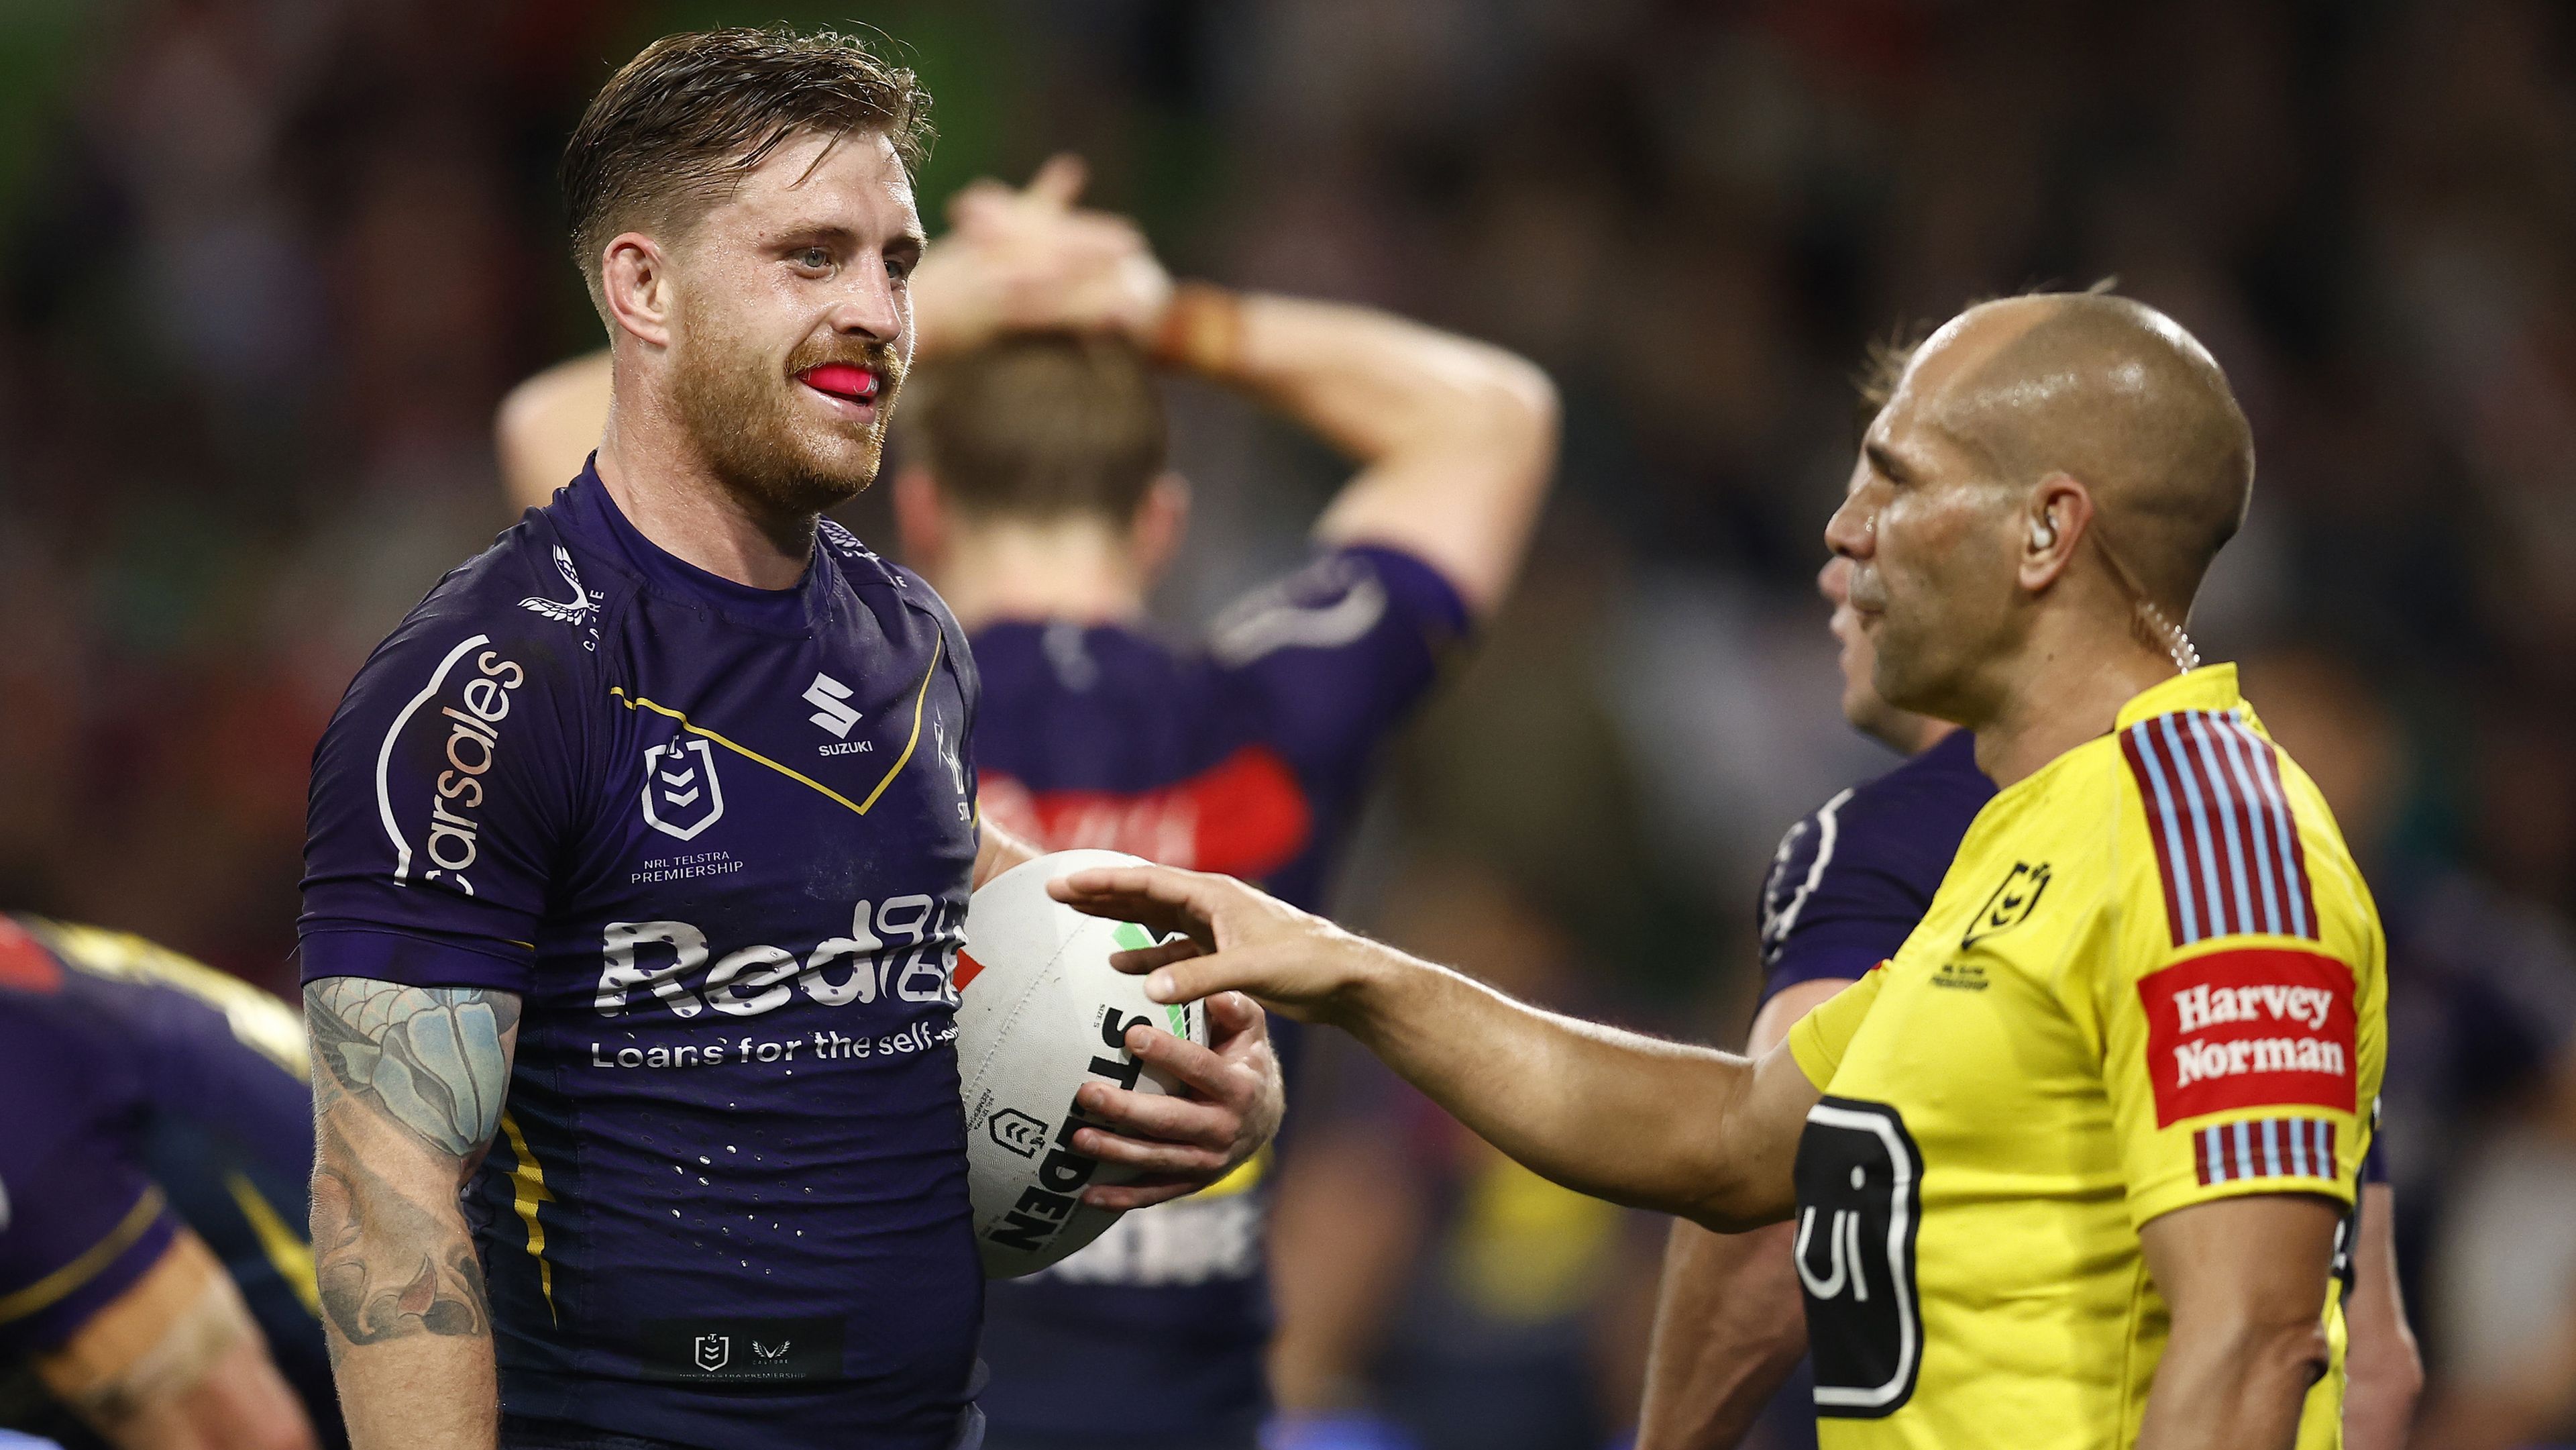 MELBOURNE, AUSTRALIA - SEPTEMBER 15:  Cameron Munster of the Storm reacts during the NRL Semi Final match between Melbourne Storm and the Sydney Roosters at AAMI Park on September 15, 2023 in Melbourne, Australia. (Photo by Daniel Pockett/Getty Images)